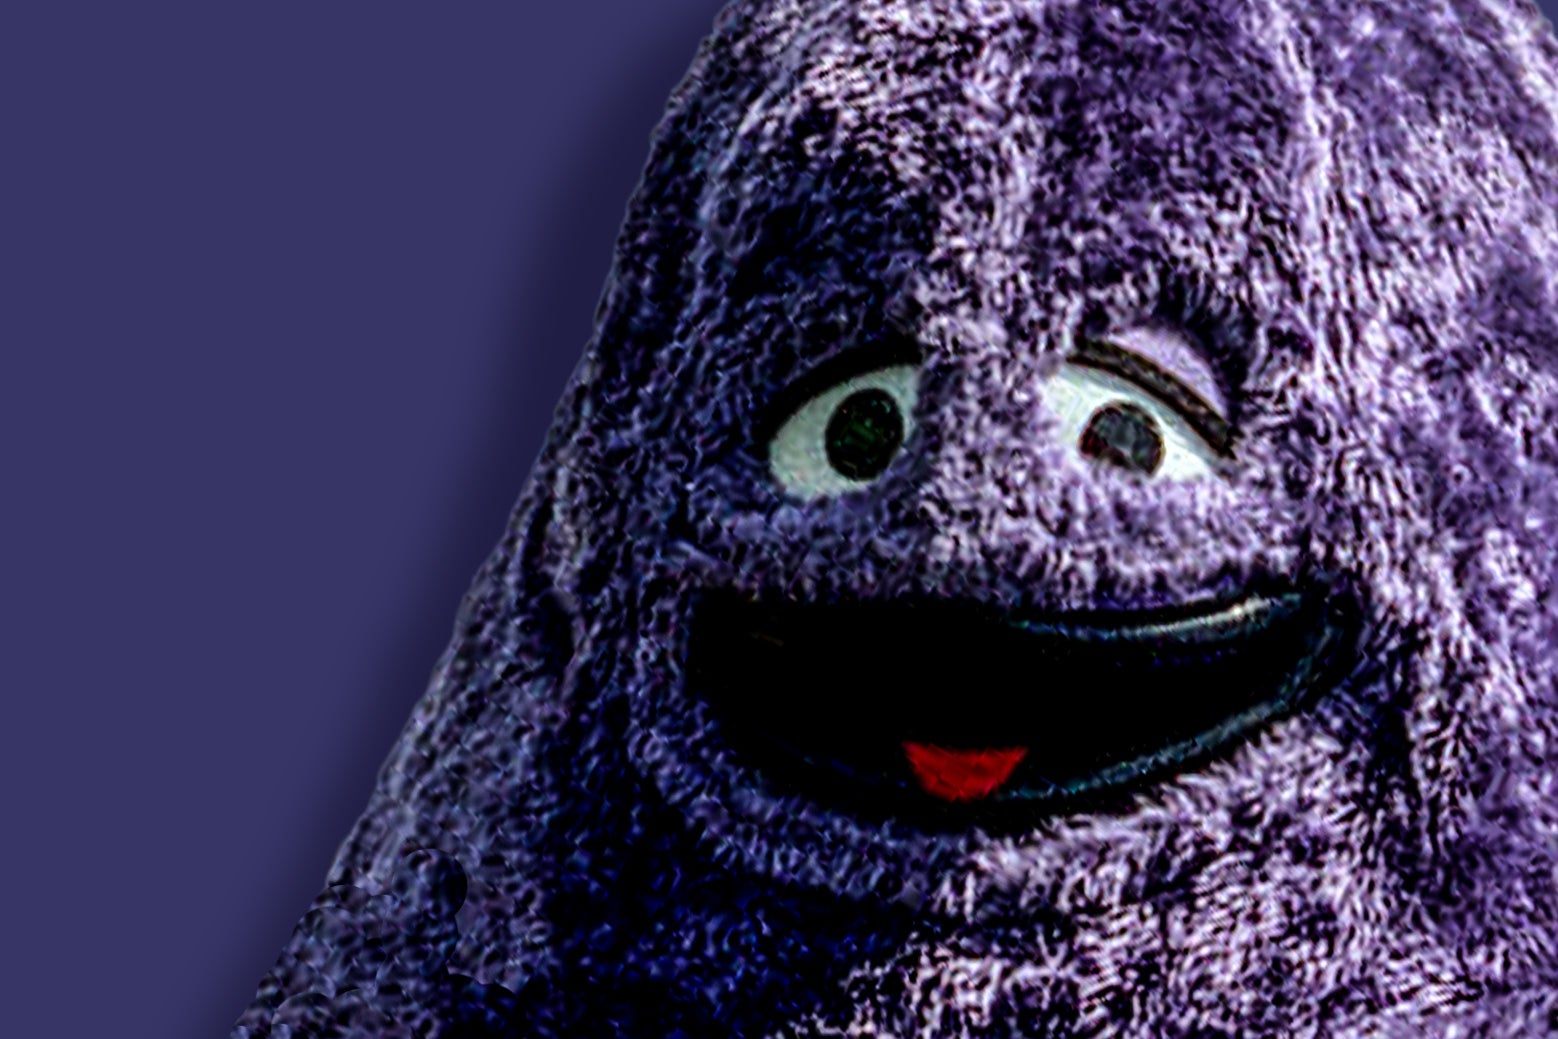 Grimace shake explained: why the internet believes a purple monster is killing them with a milkshake